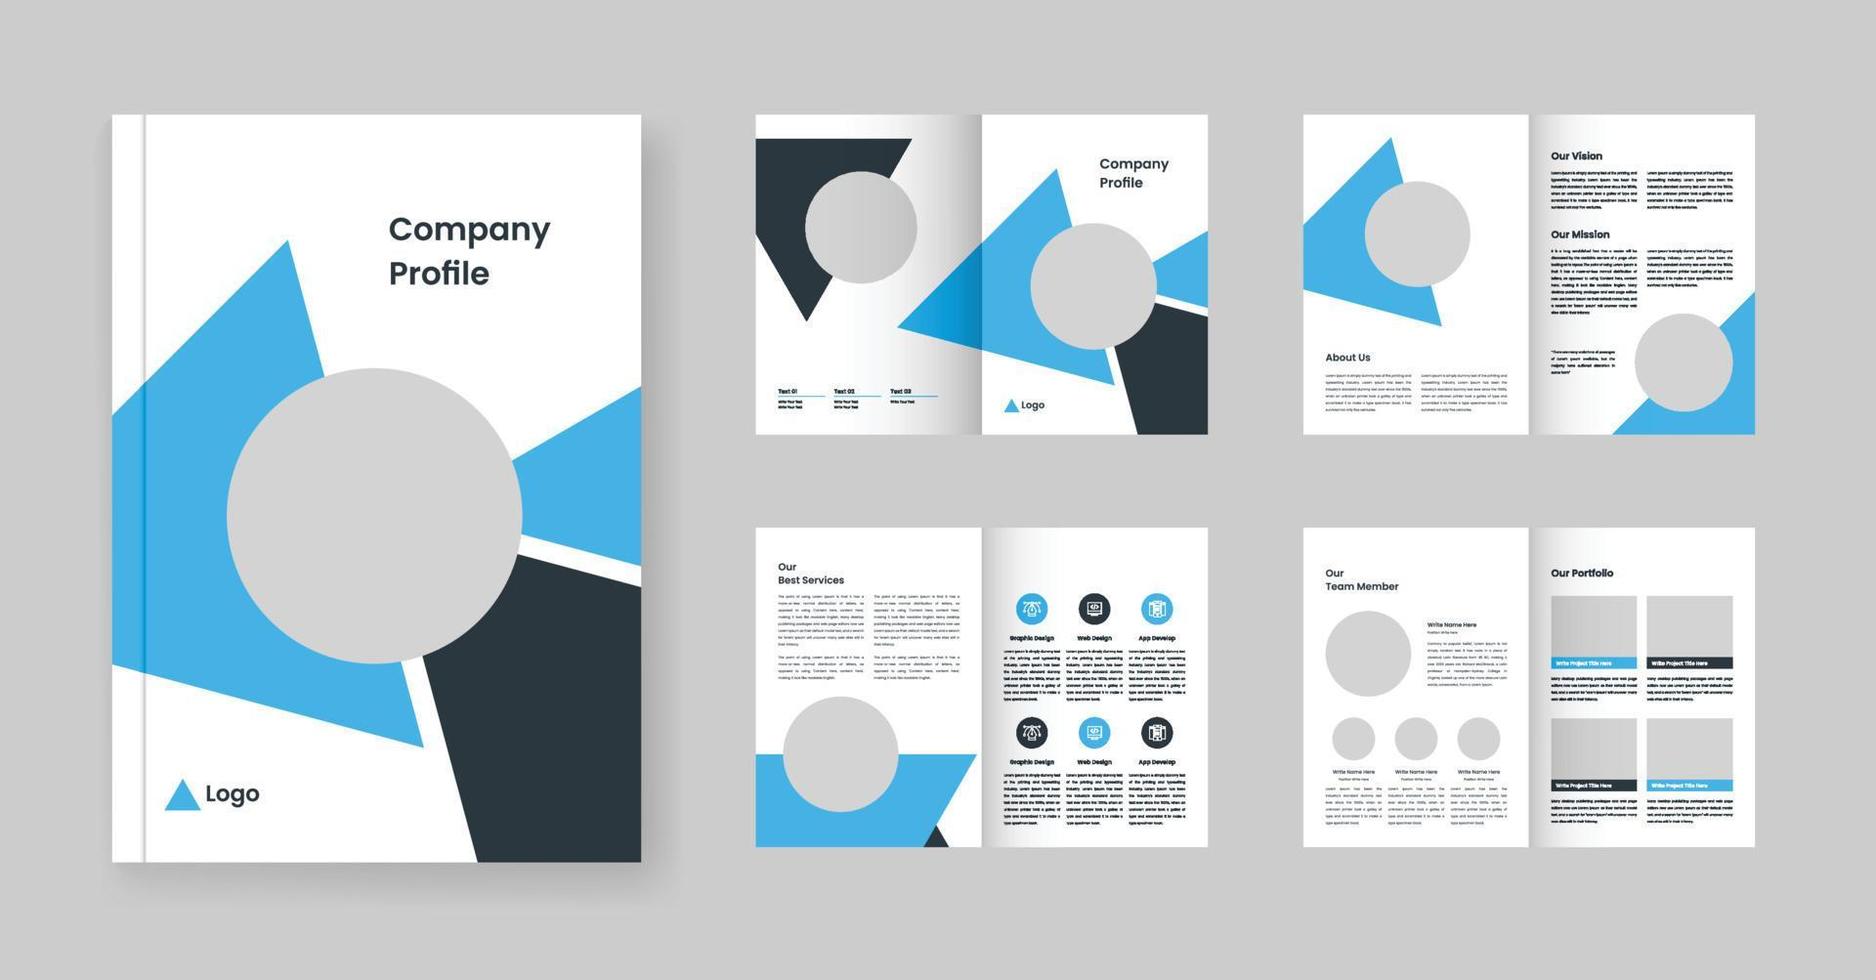 Design company profile, vector template brochures, flyers, presentations, leaflet, white paper, catalog, magazine a4 size. Dark grey and blue geometric elements on a white background